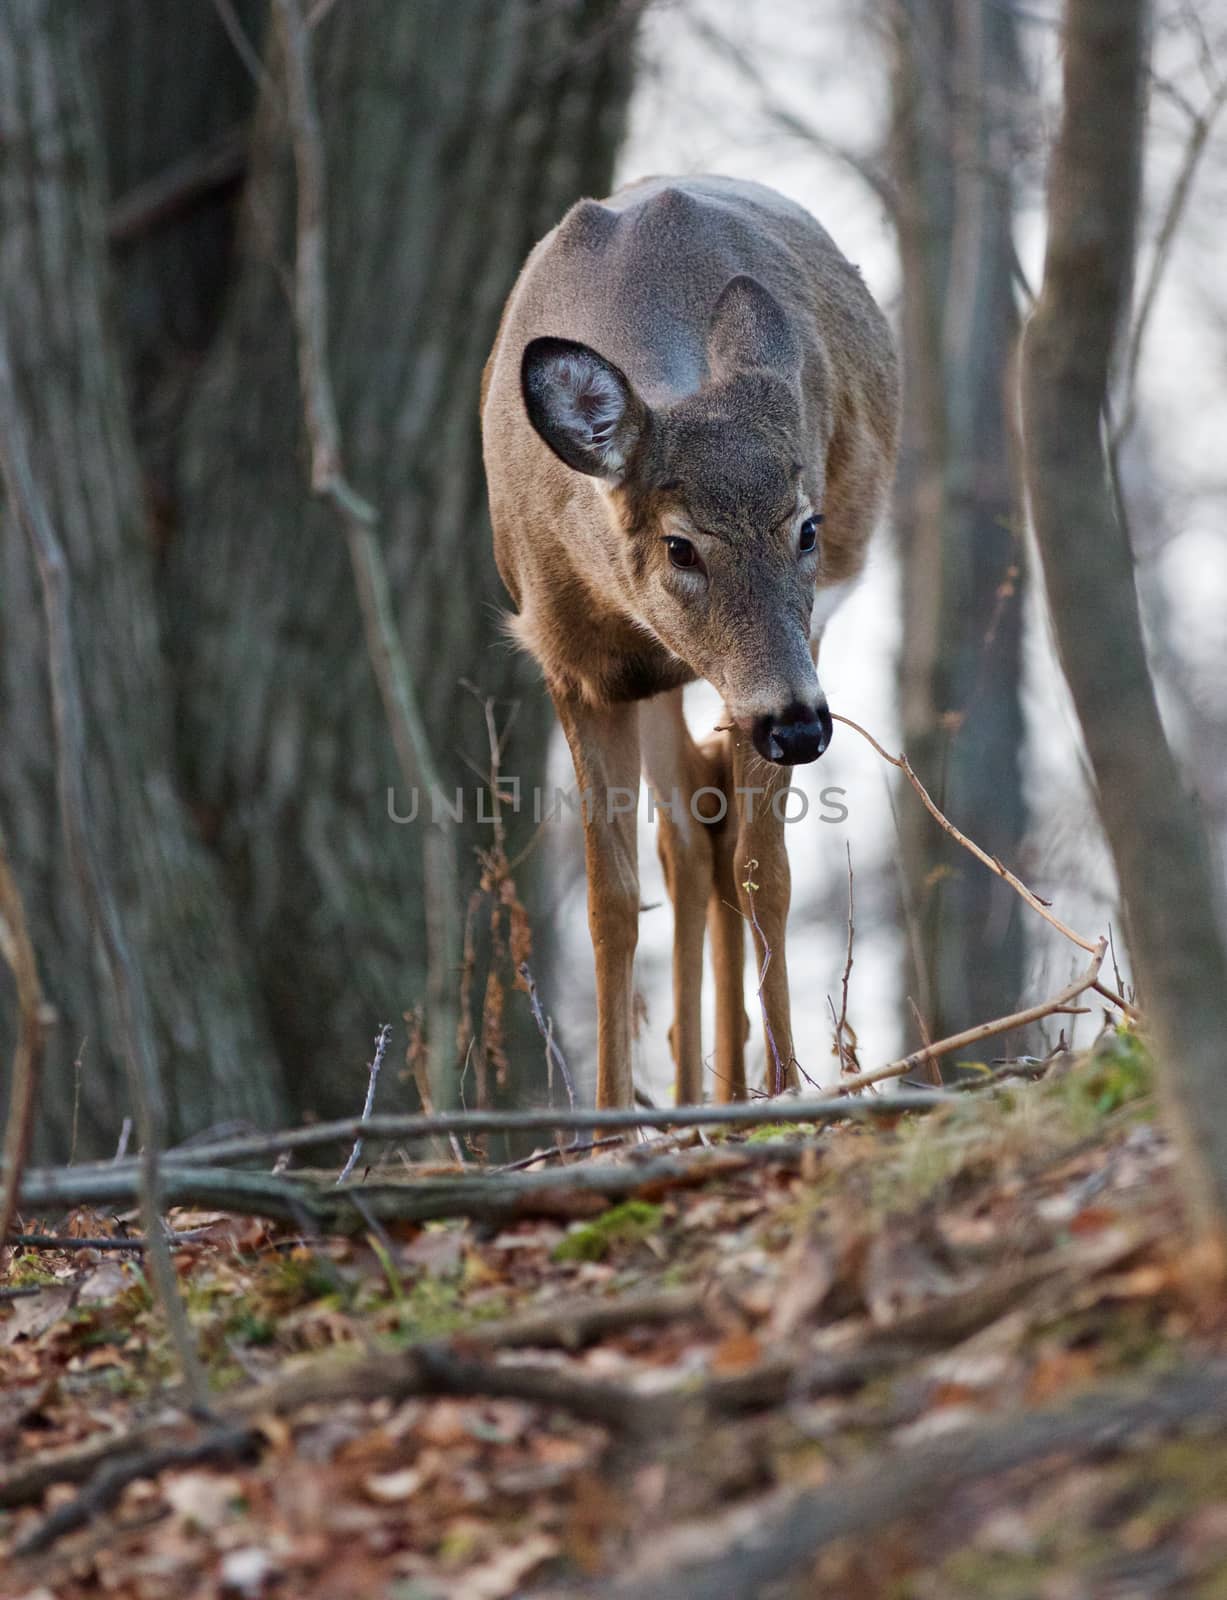 The beautiful close-up of a young deer in the forest